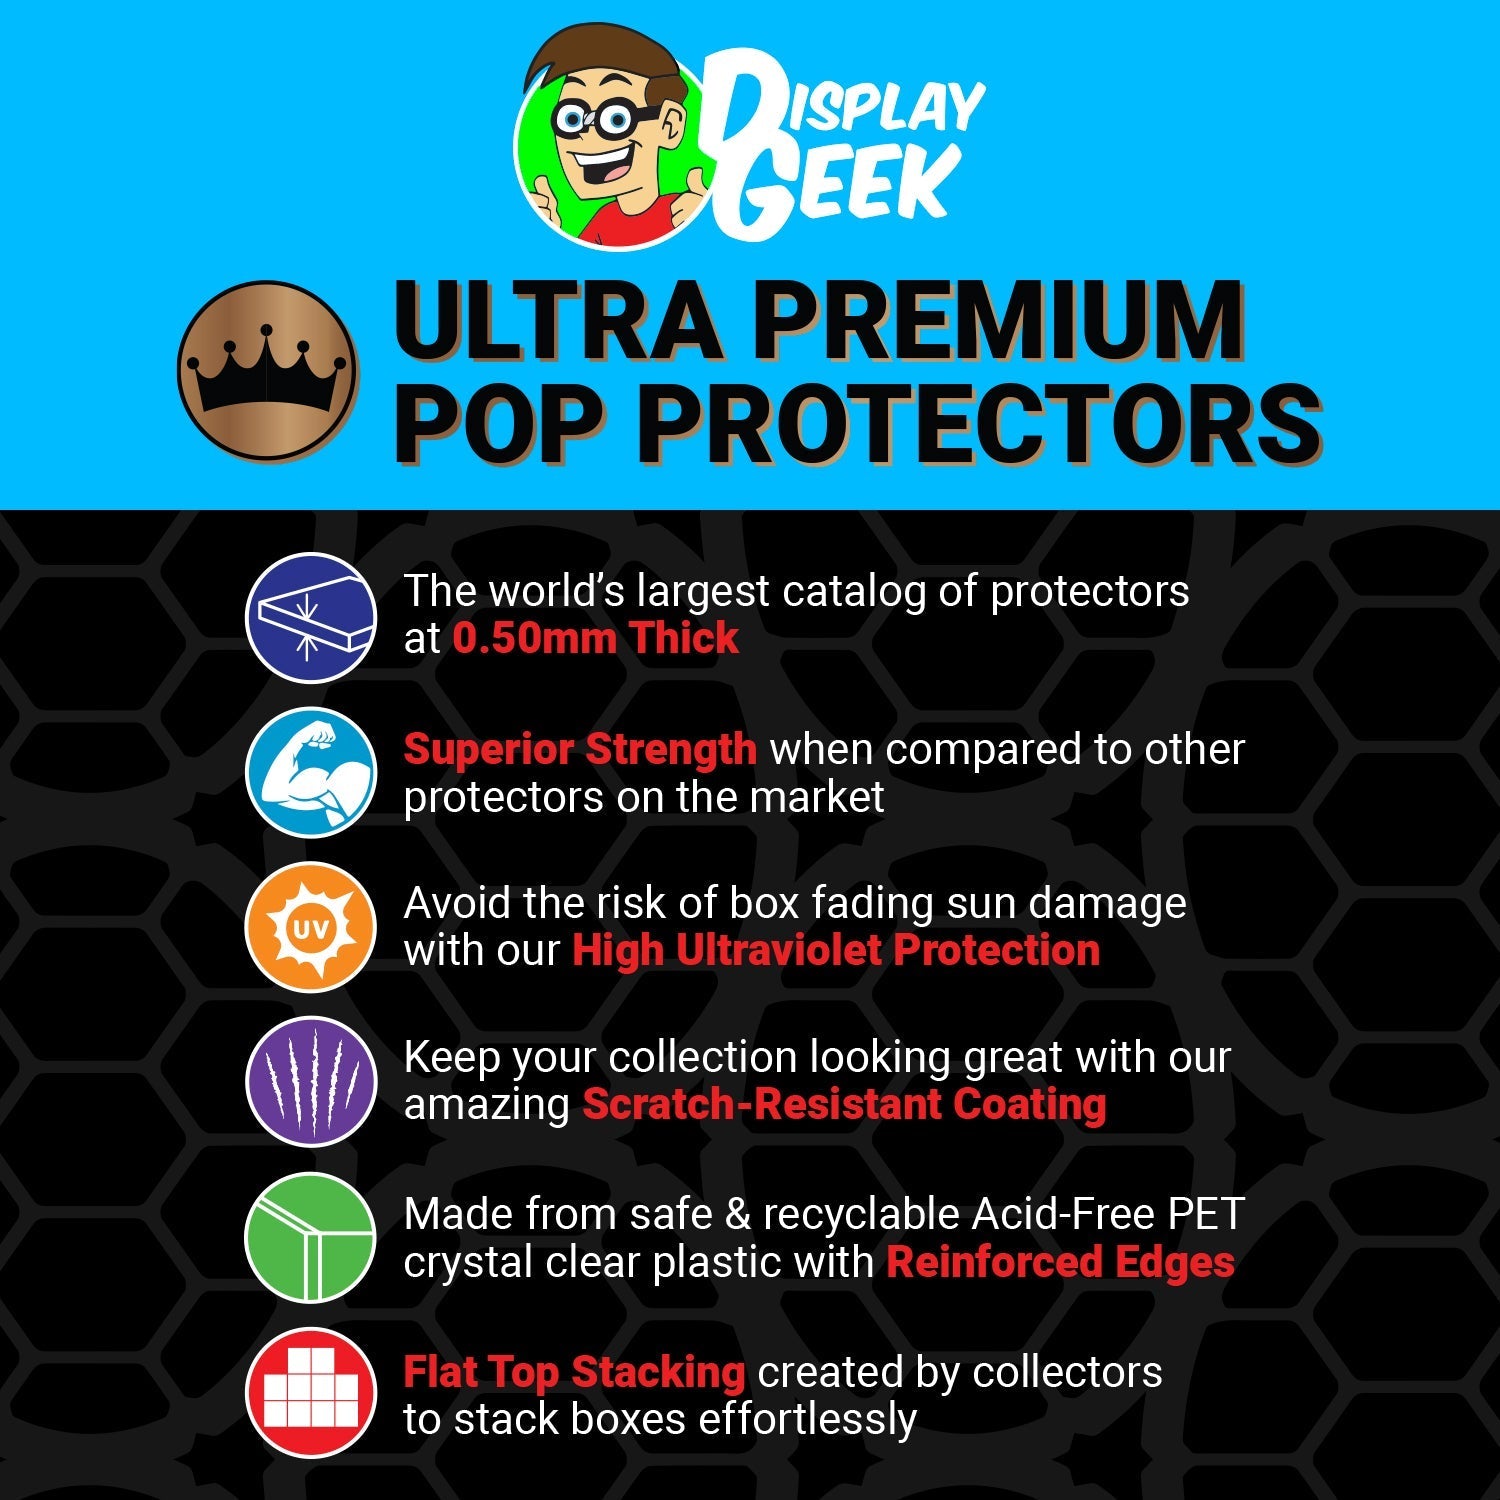 Pop Protector for Charger 1970 with Dom Toretto #17 Funko Pop Rides - PPG Pop Protector Guide Search Created by Display Geek